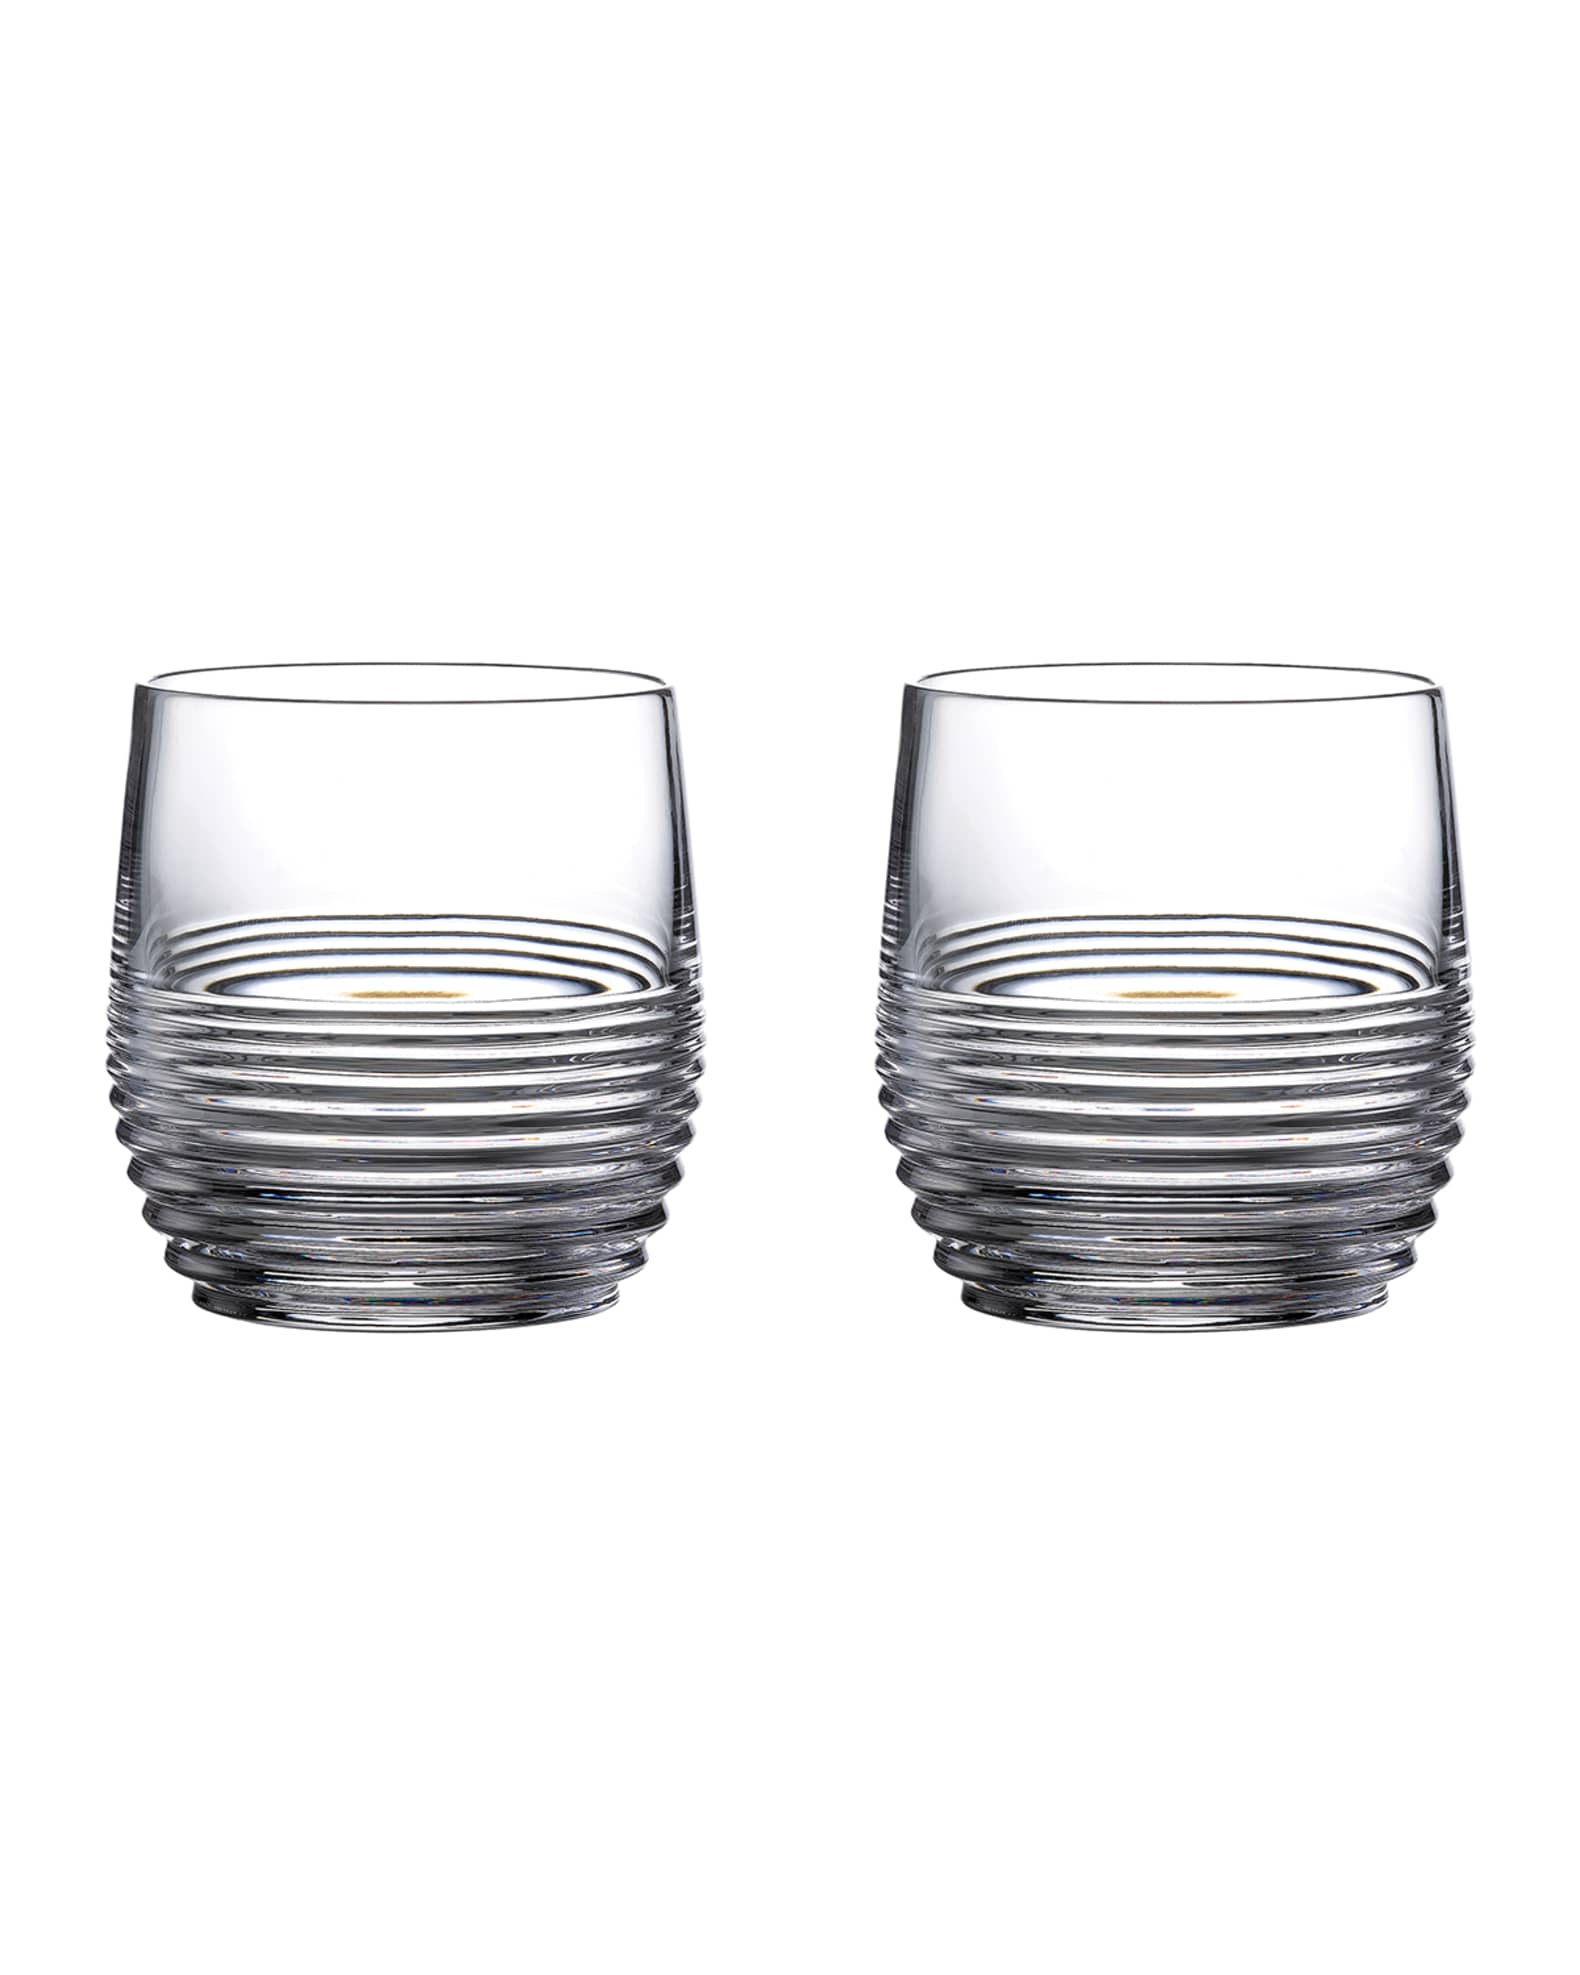 Waterford Crystal Circon Tumblers, Set of 2